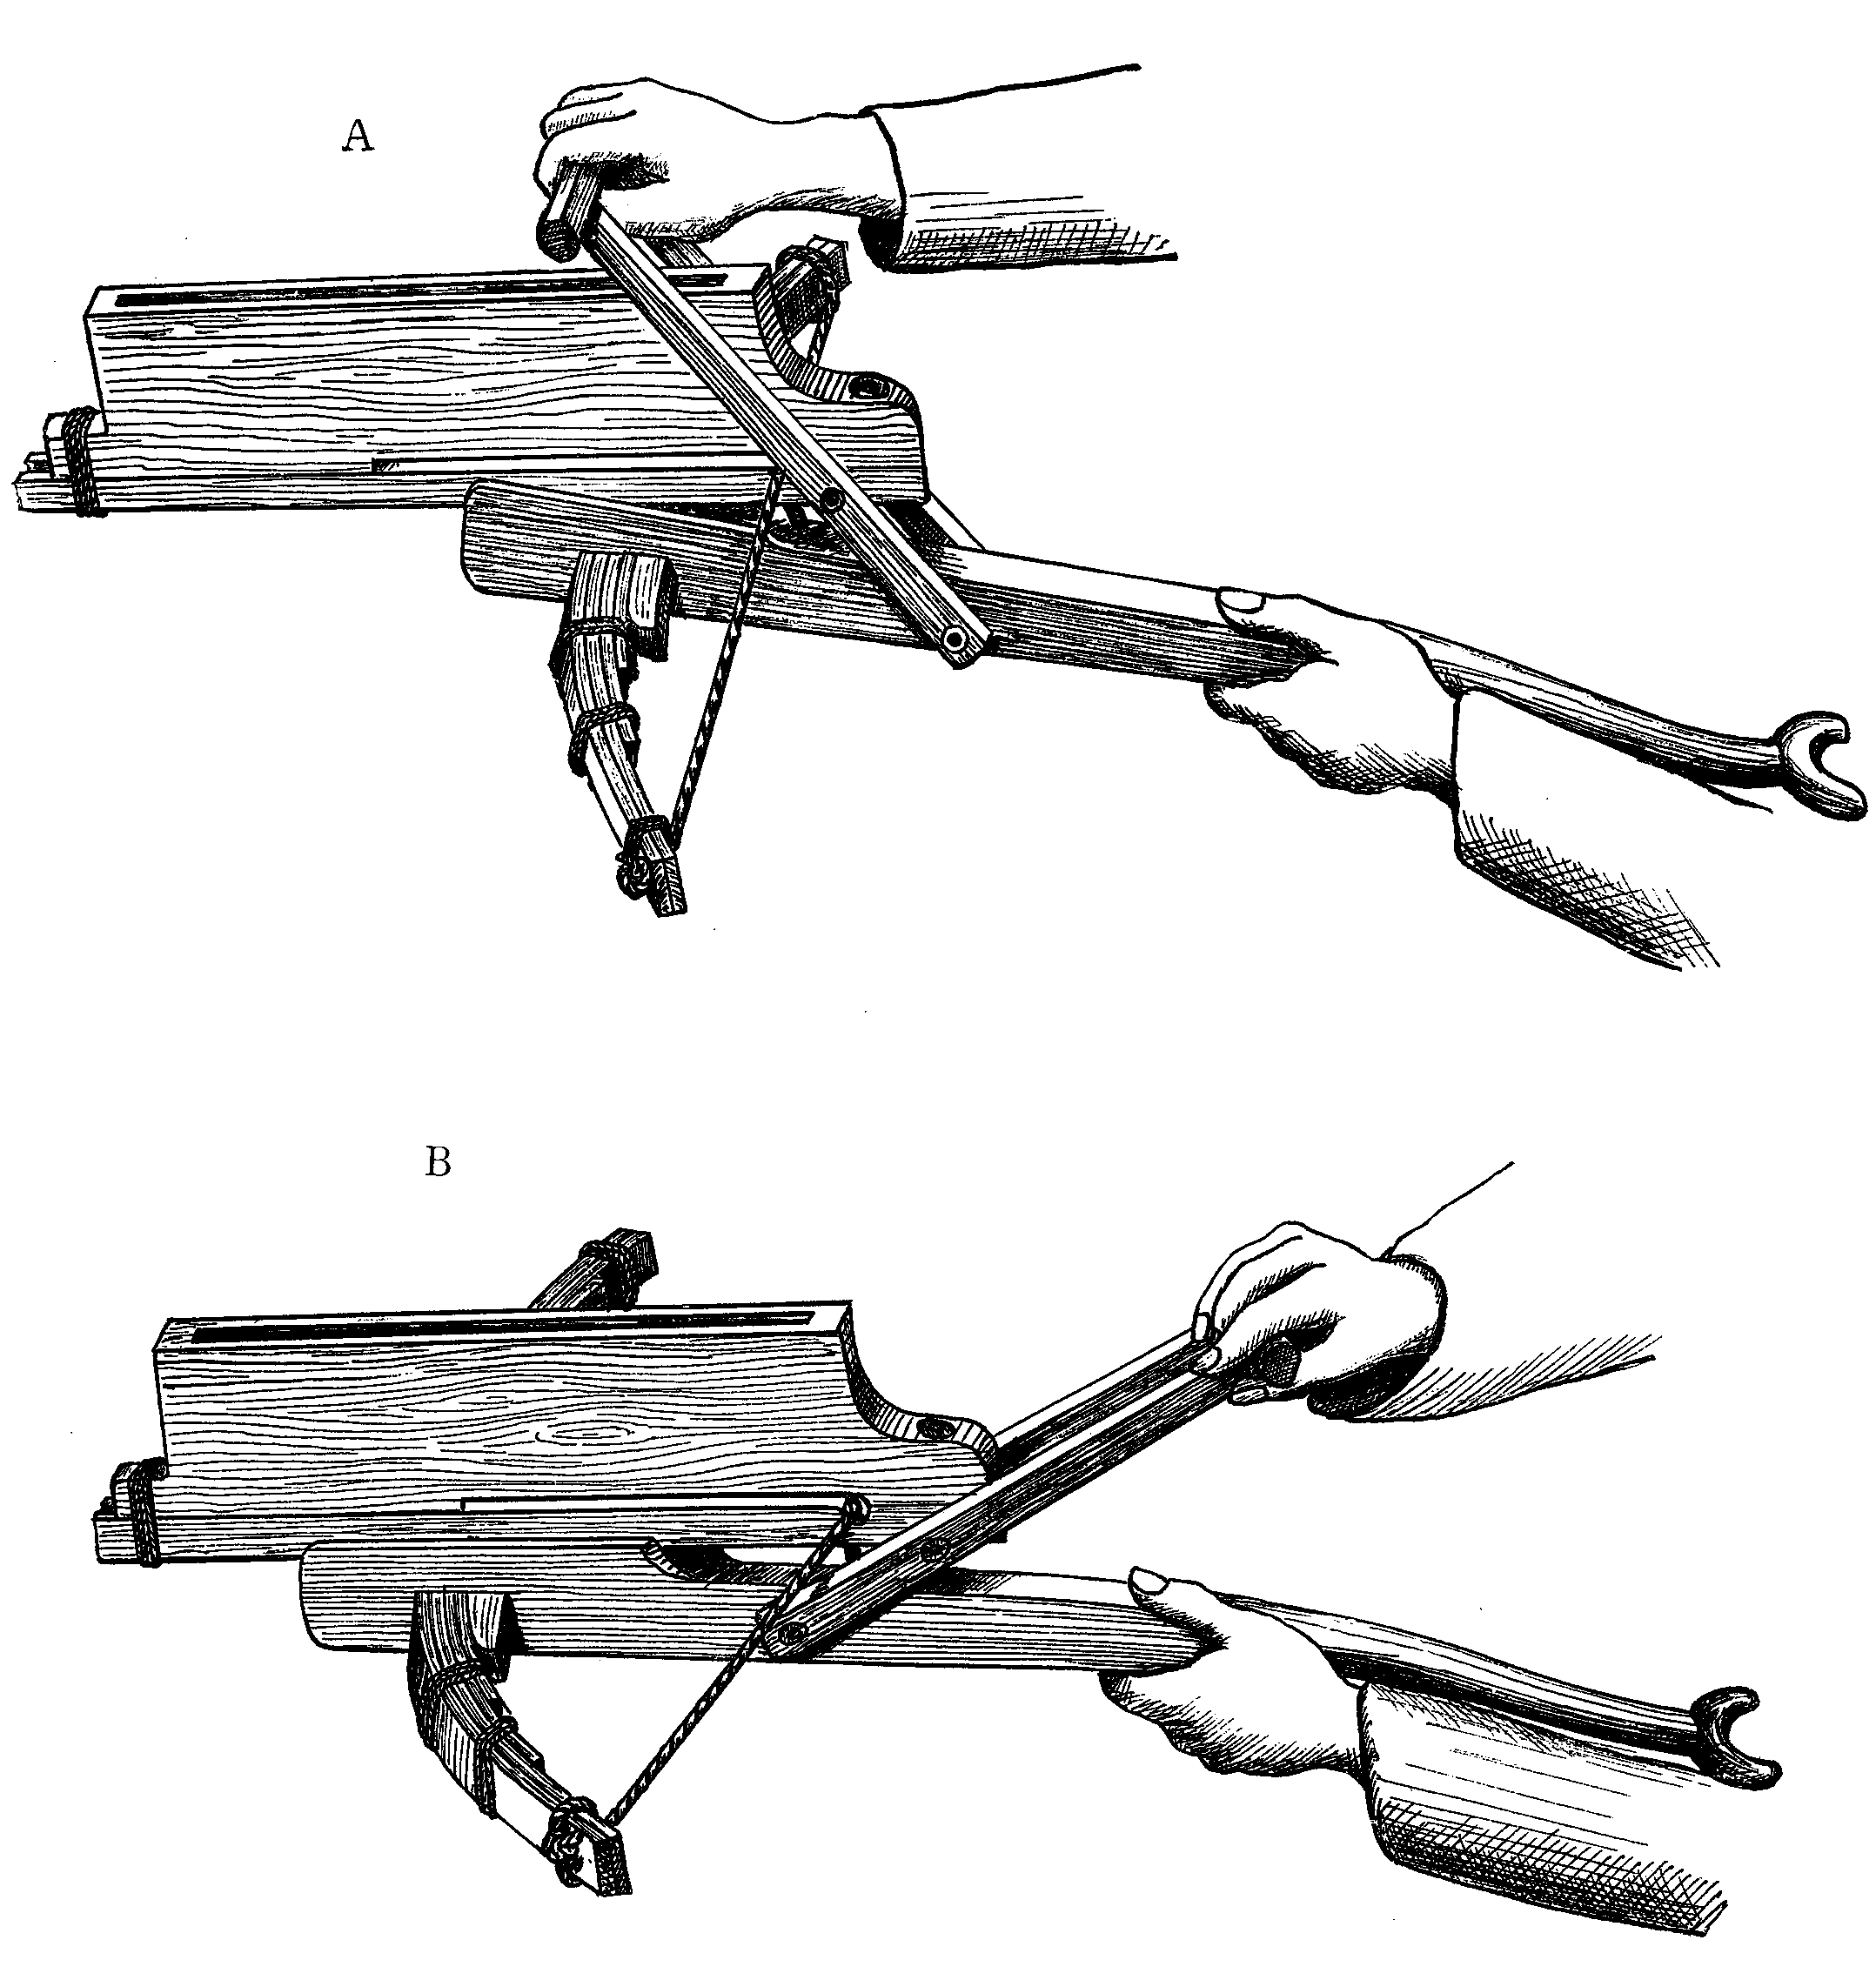 repeating crossbow ds3